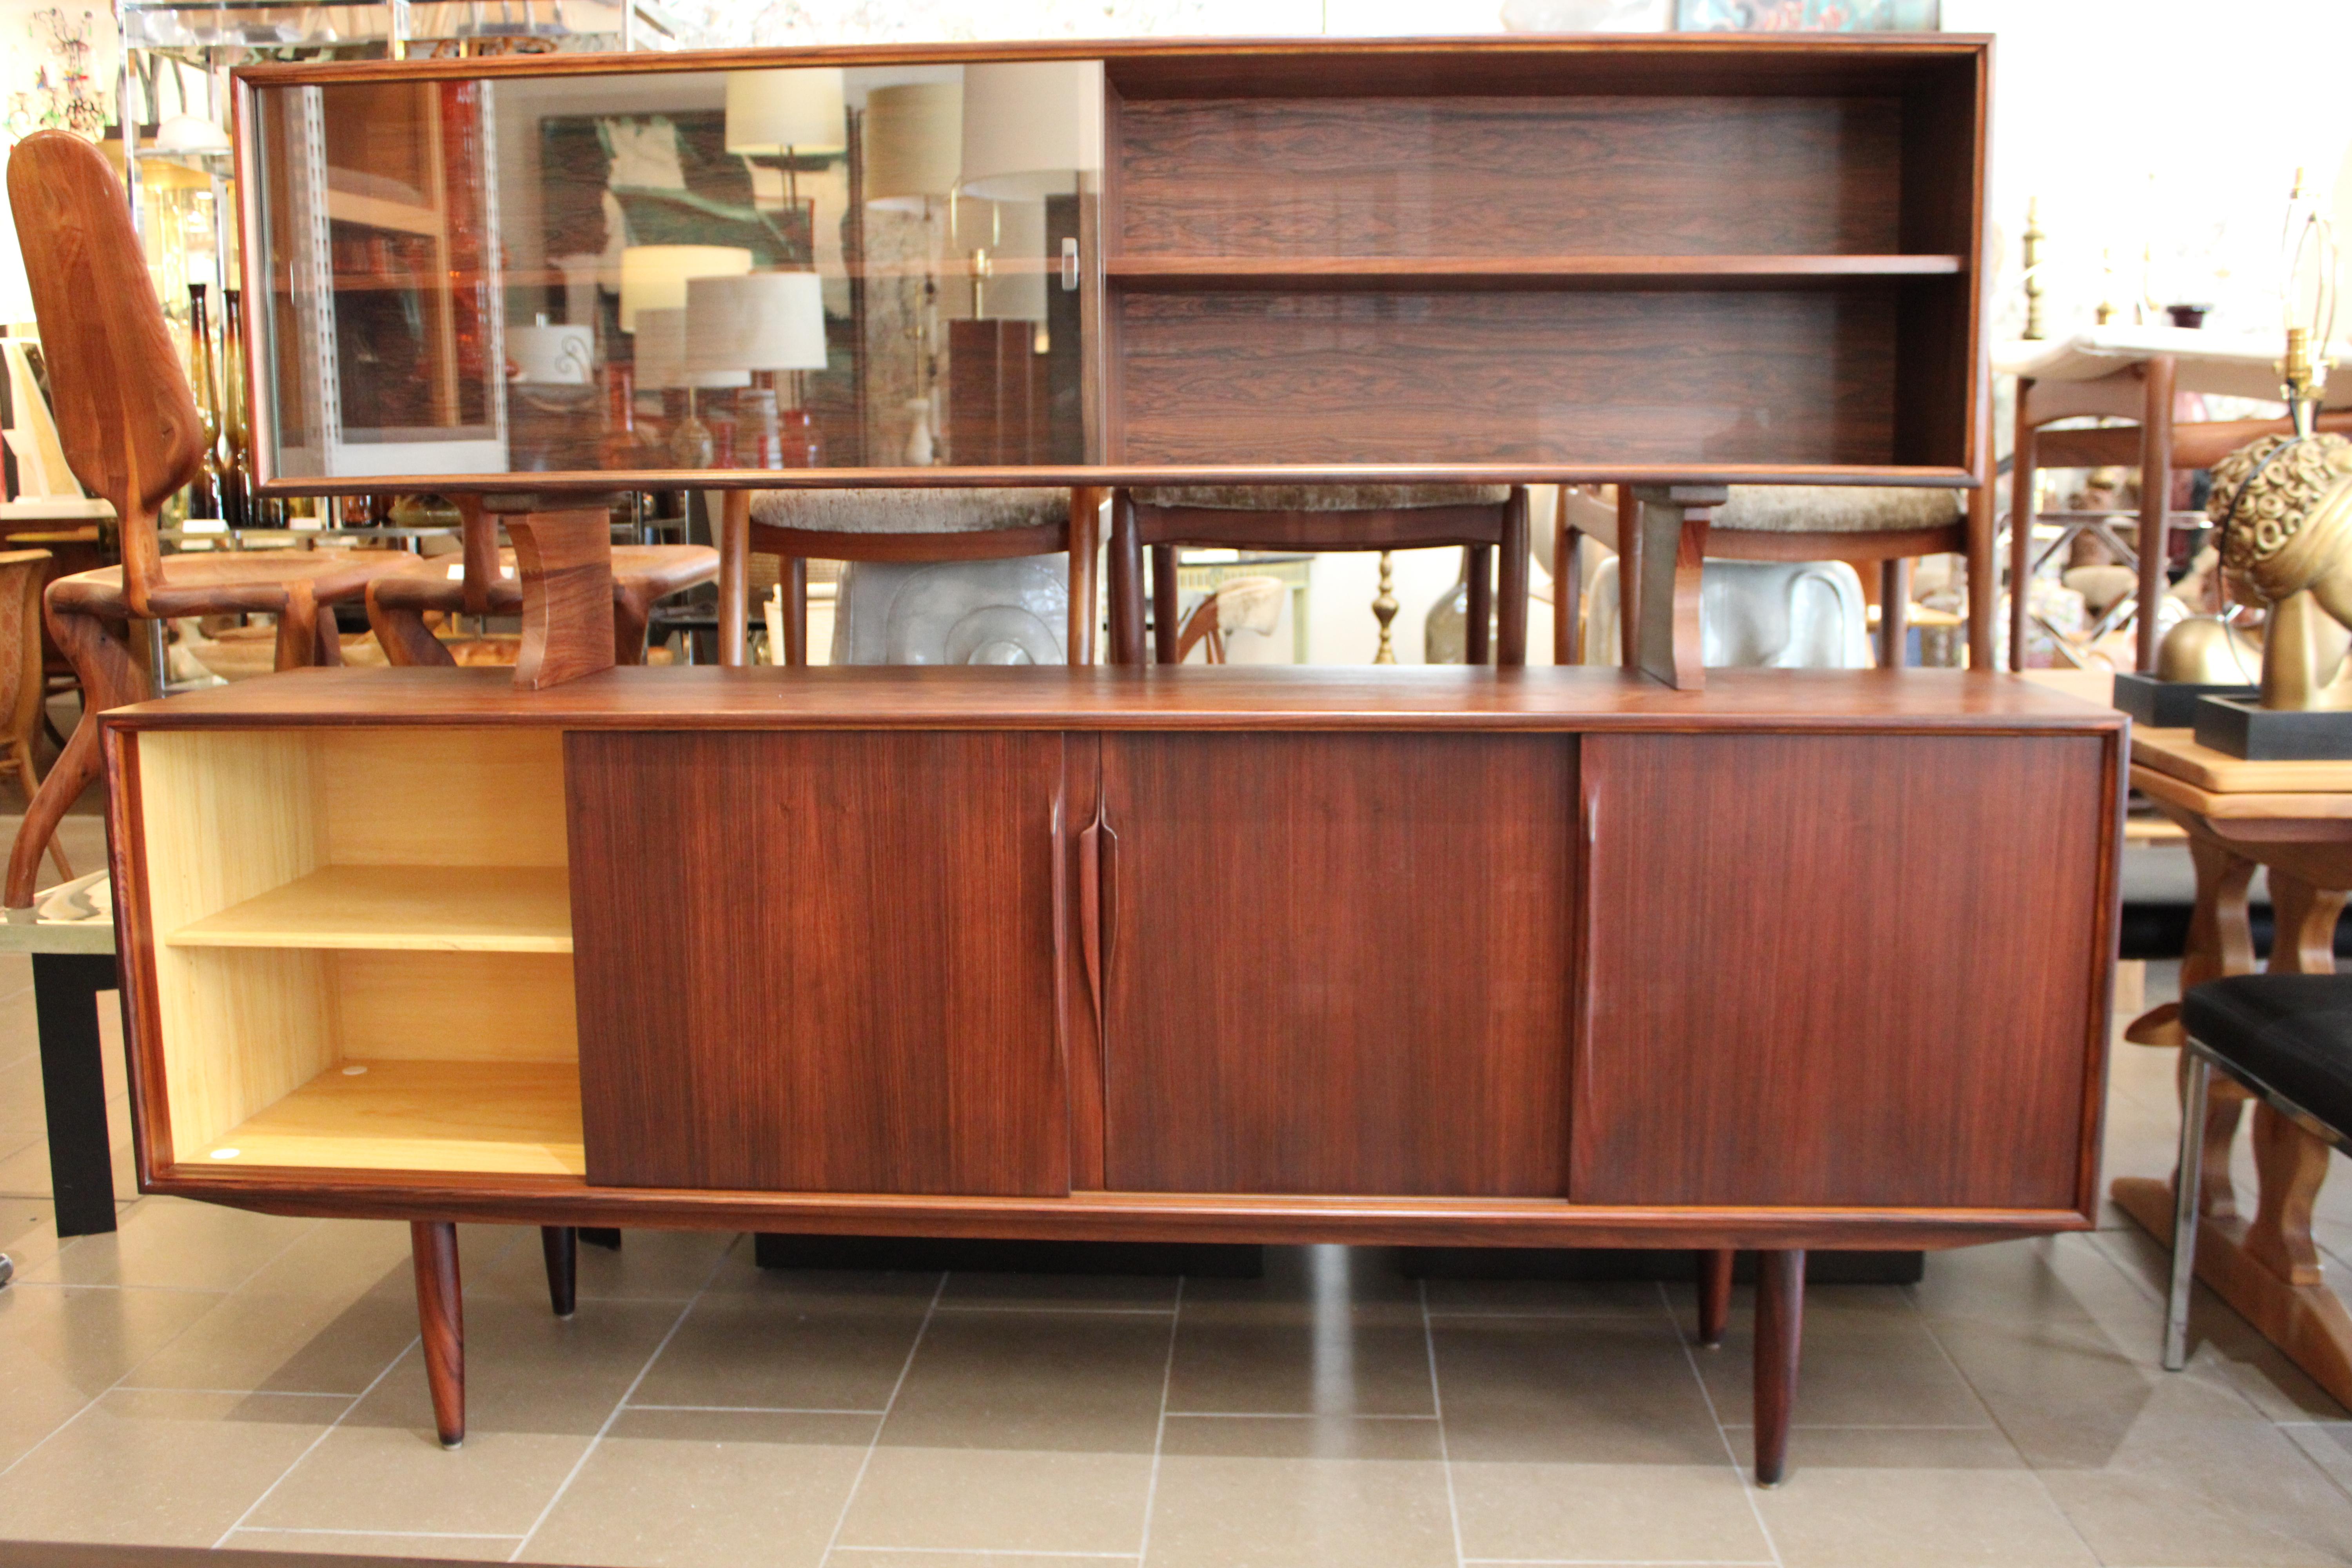 Vintage buffet sideboard by Axel Christensen for ACO Møbler, Denmark 1960s. Beautifully designed sideboard in rosewood with elegant handles, three drawers and plenty of storage space with adjustable shelves. The sideboard (top portion) is marked by